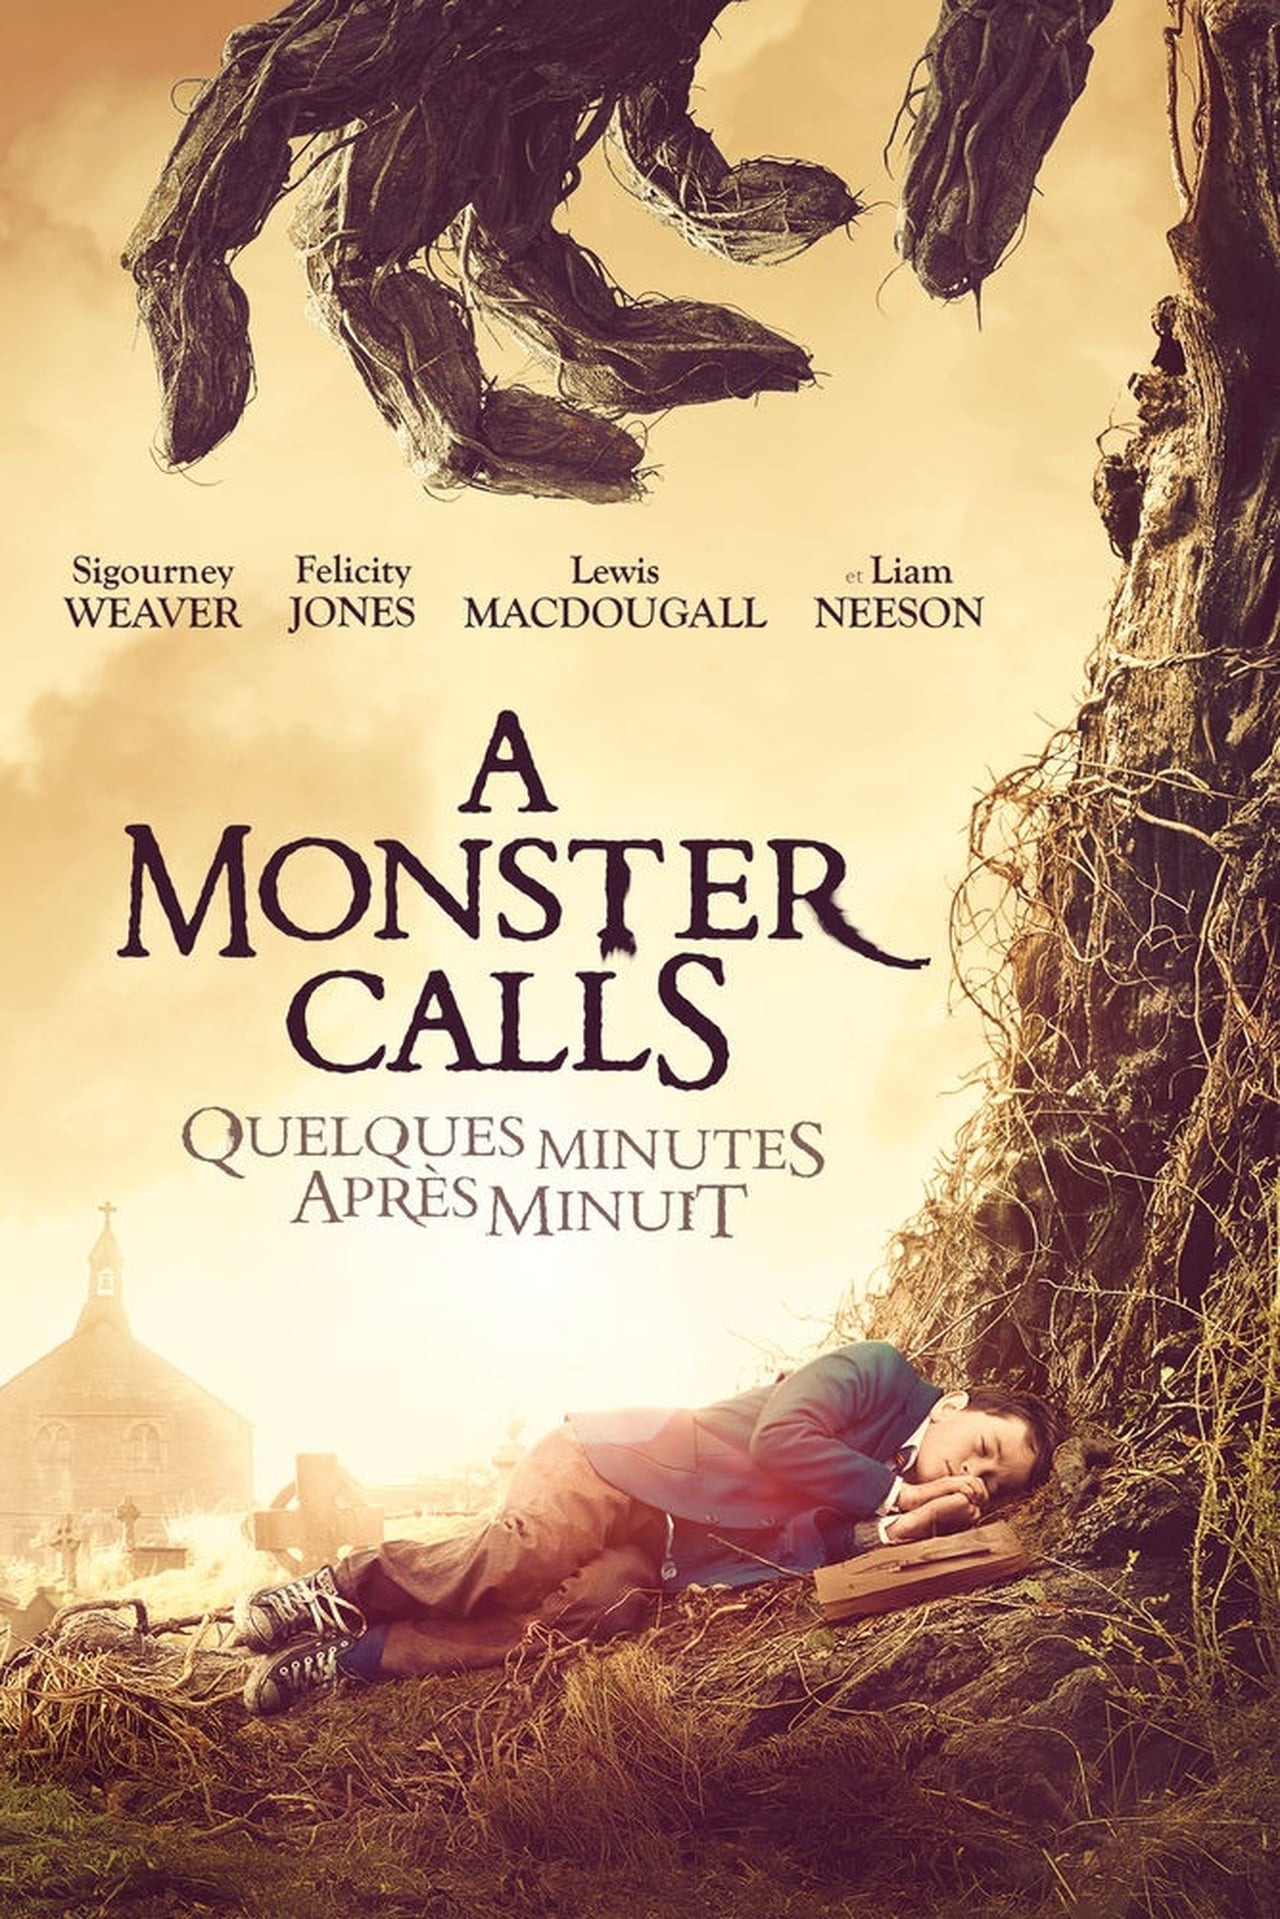 A Monster Calls wiki, synopsis, reviews, watch and download
